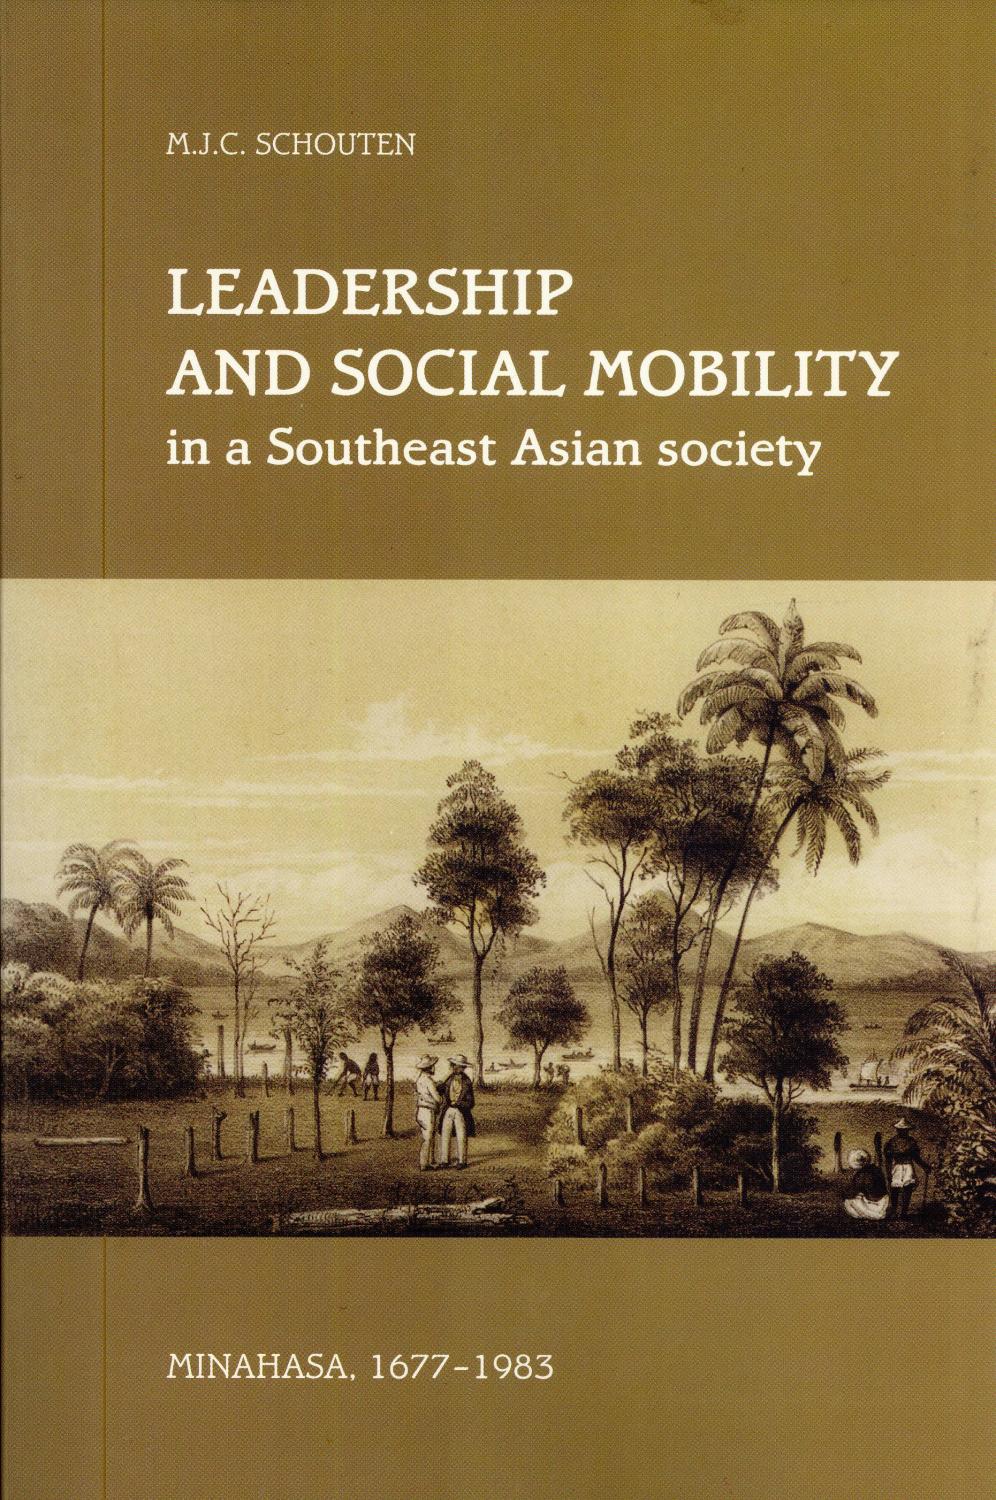 Leadership and Social Mobility in a Southeast Asian Society: Minahasa, 1677-1983 - Schouten, M. J. C.